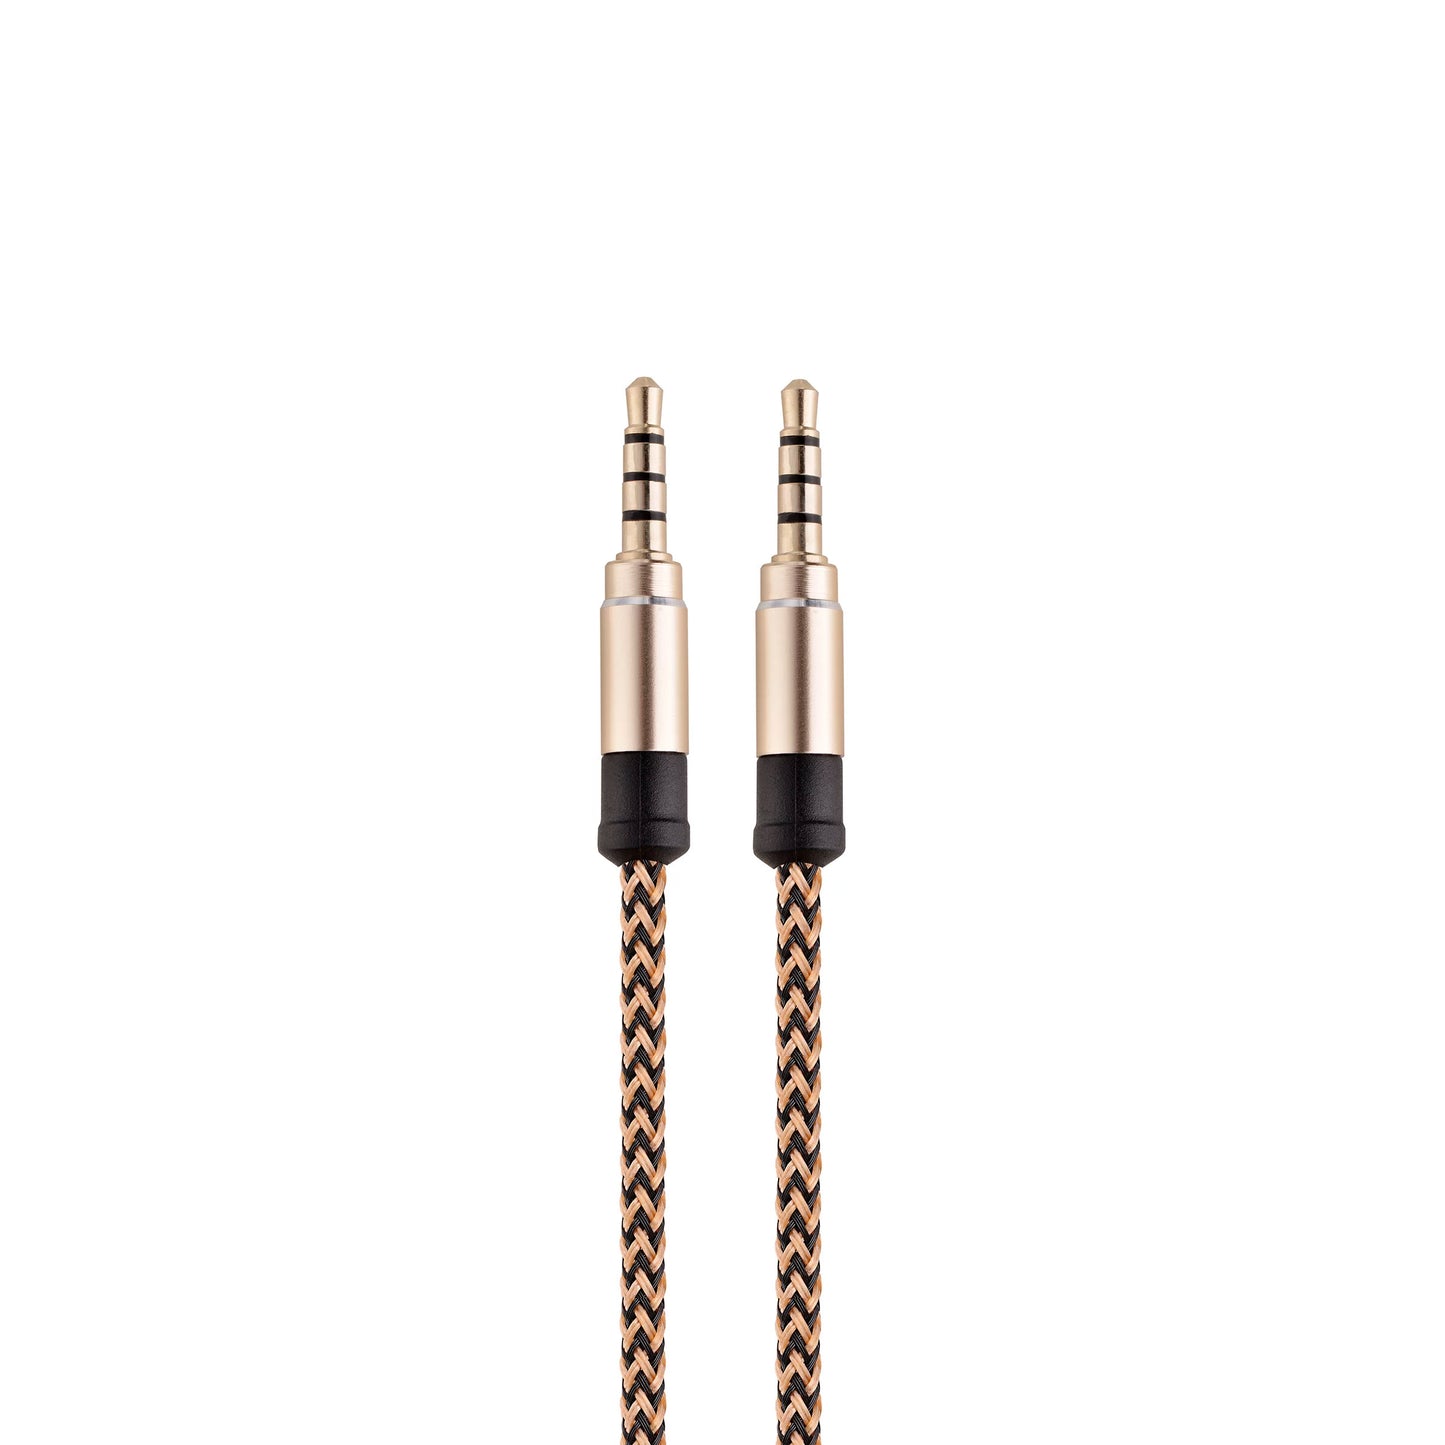 [MOTTO IC] Braided Audio Cable 3FT